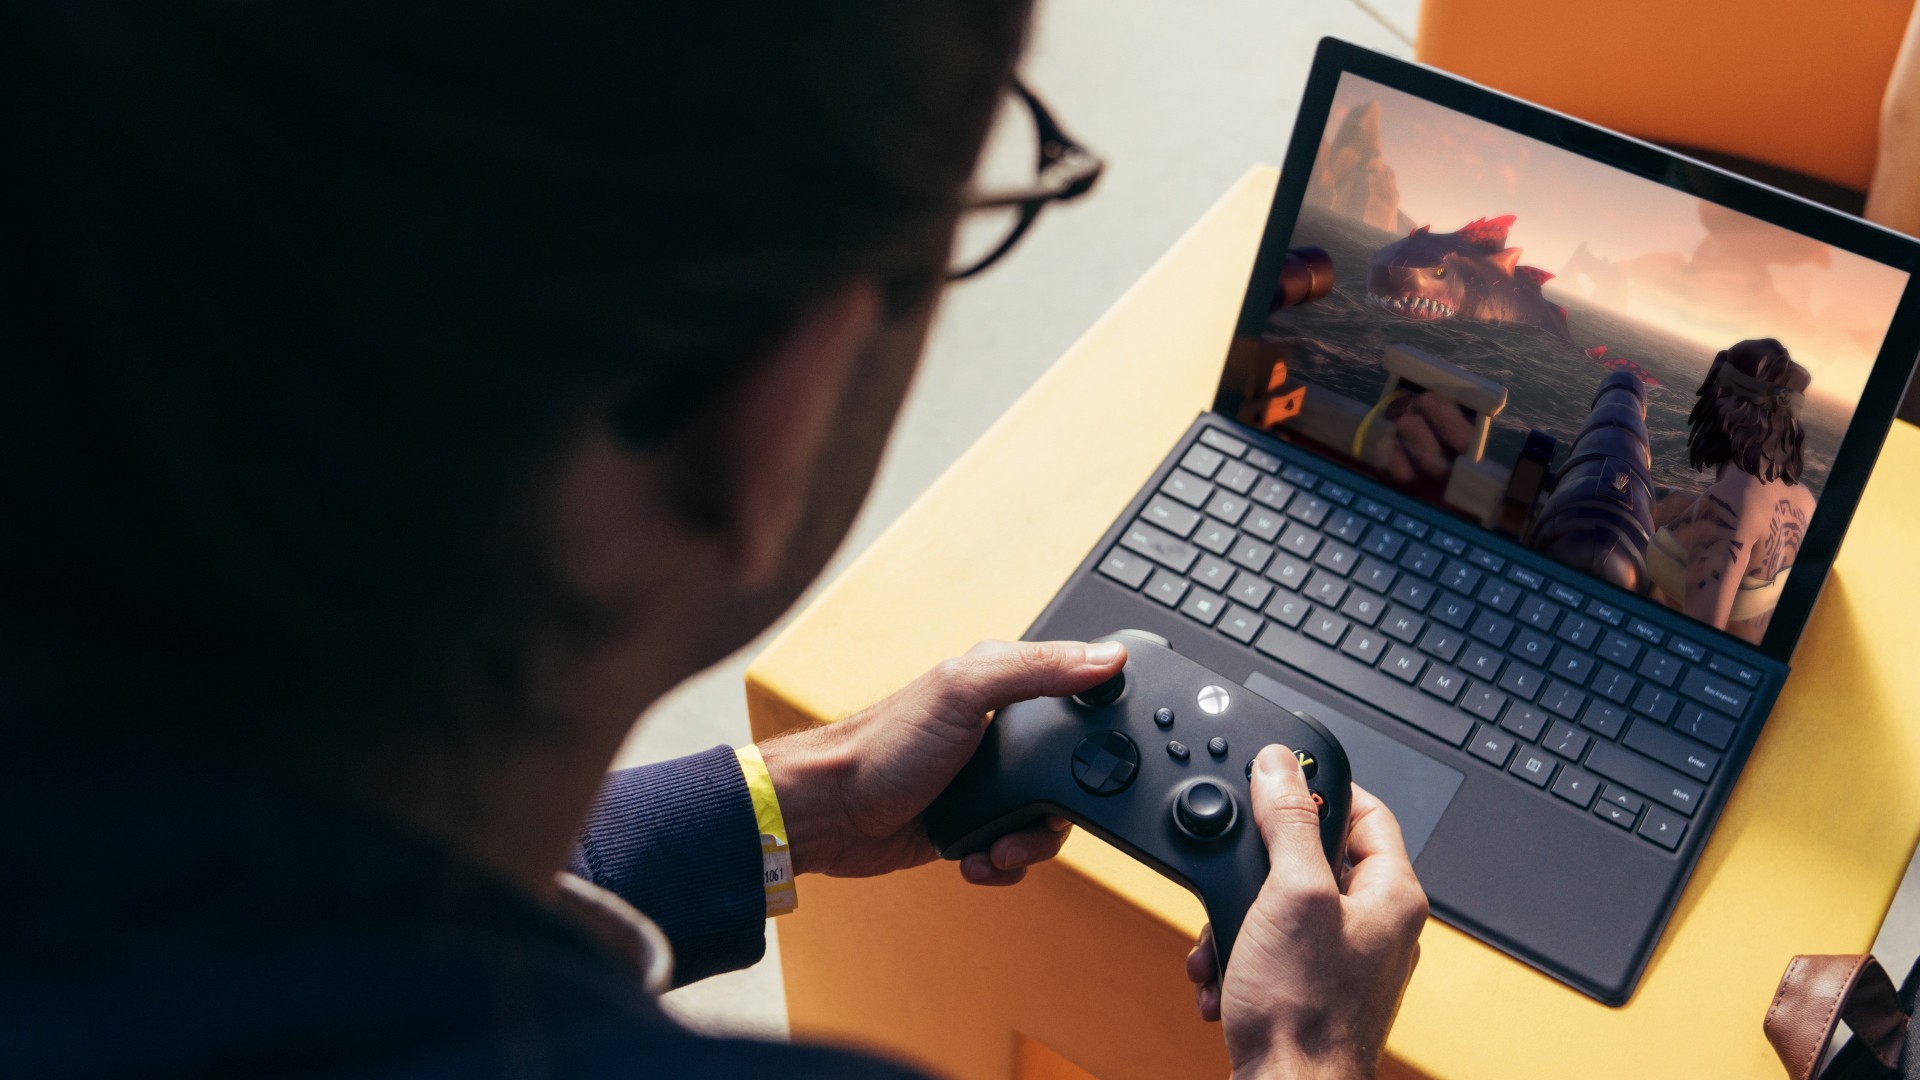 New Updates to App on Windows 10 PCs Let You Stream Console Games the Cloud or Home Console - Xbox Wire